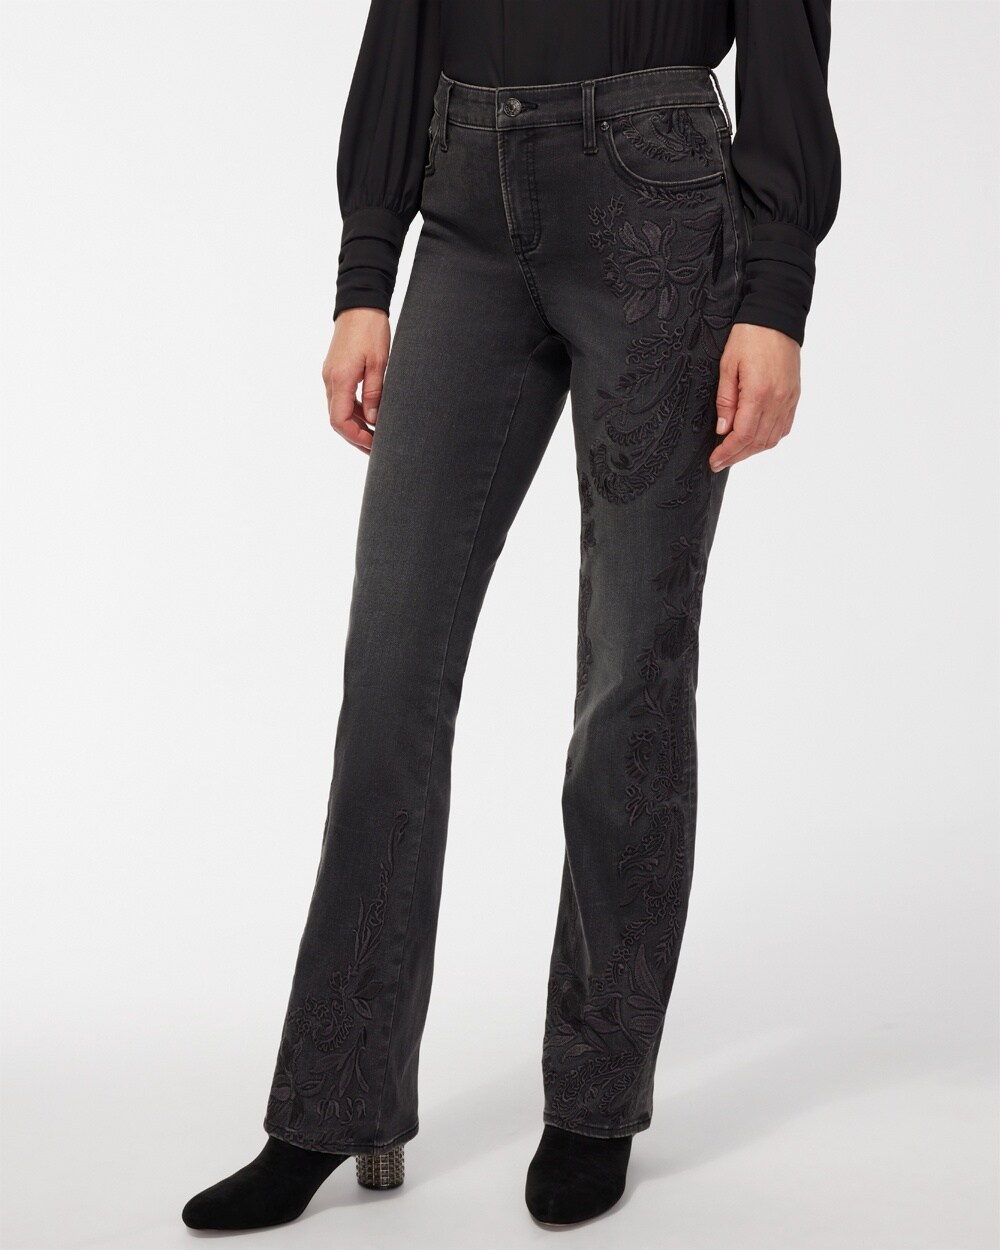 Girlfriend Tonal Embroidered Flare Jeans video preview image, click to start video